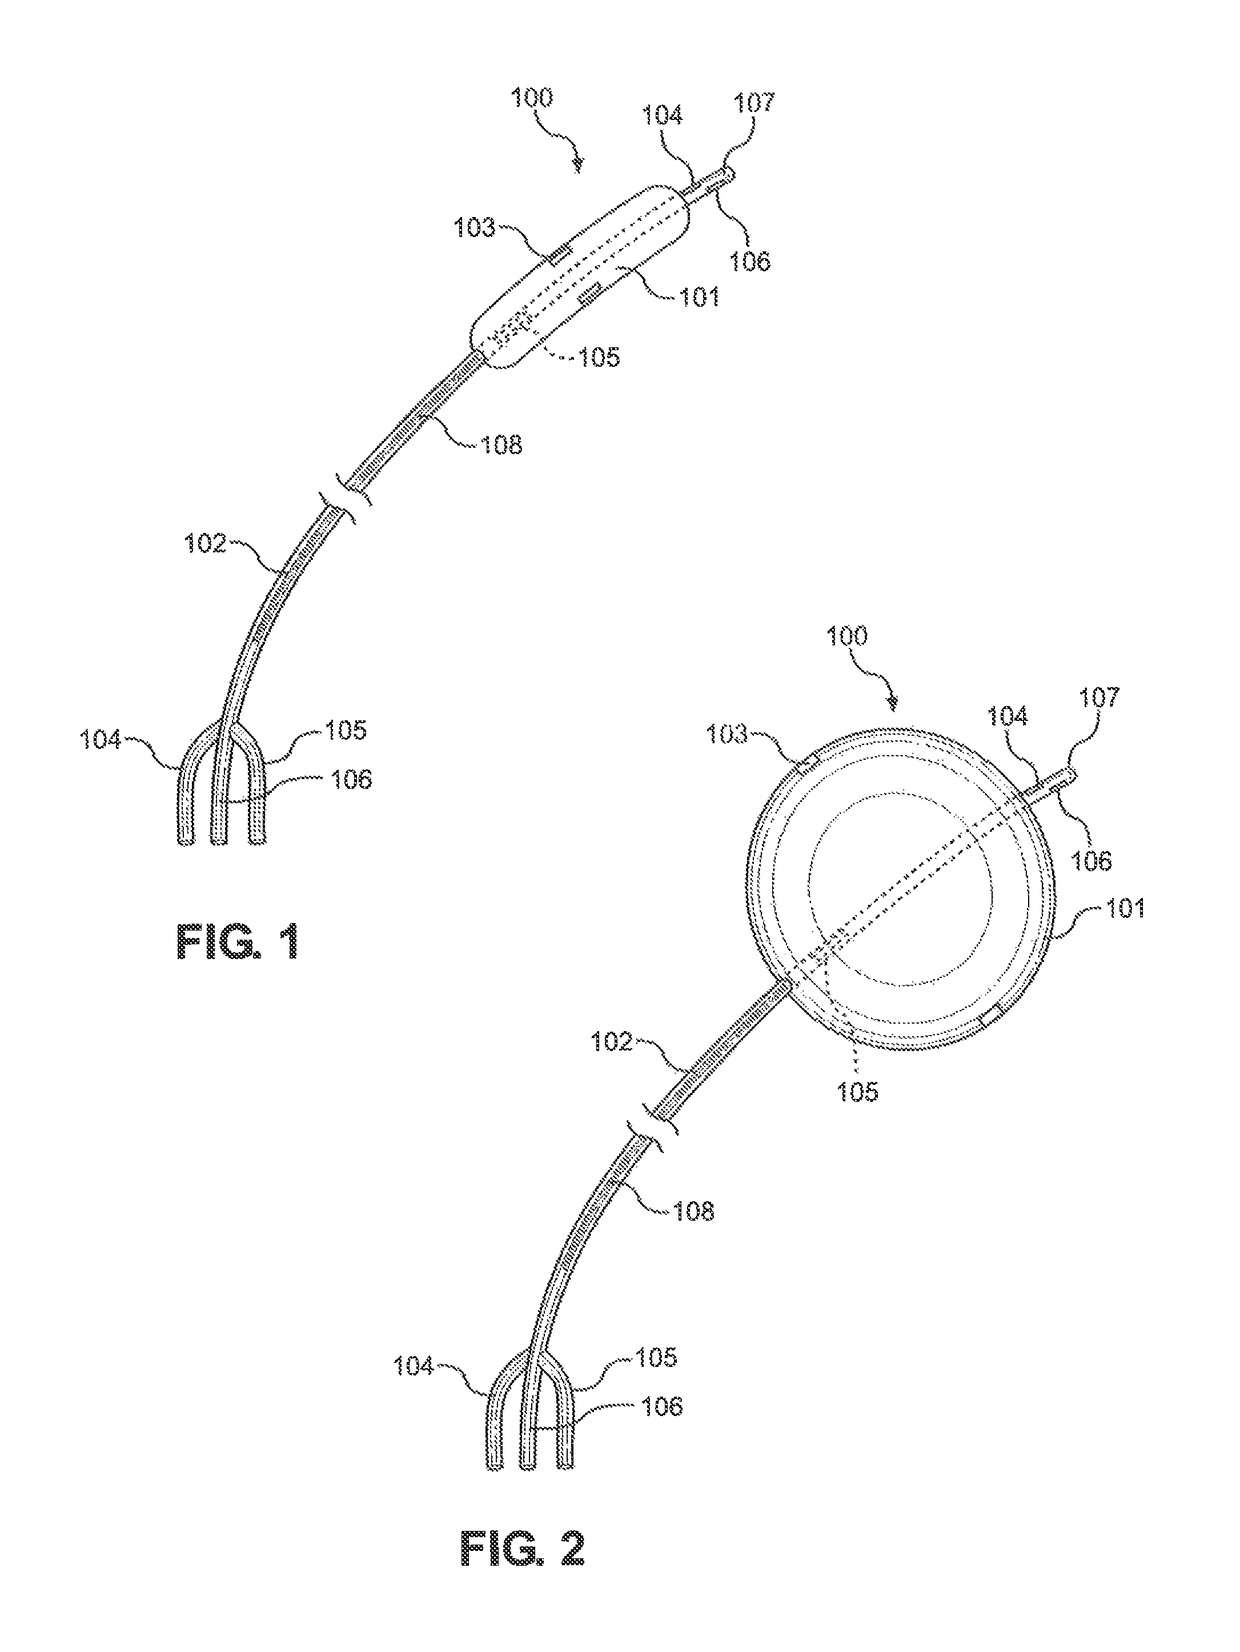 Balloon immobilization device for radiation treatment